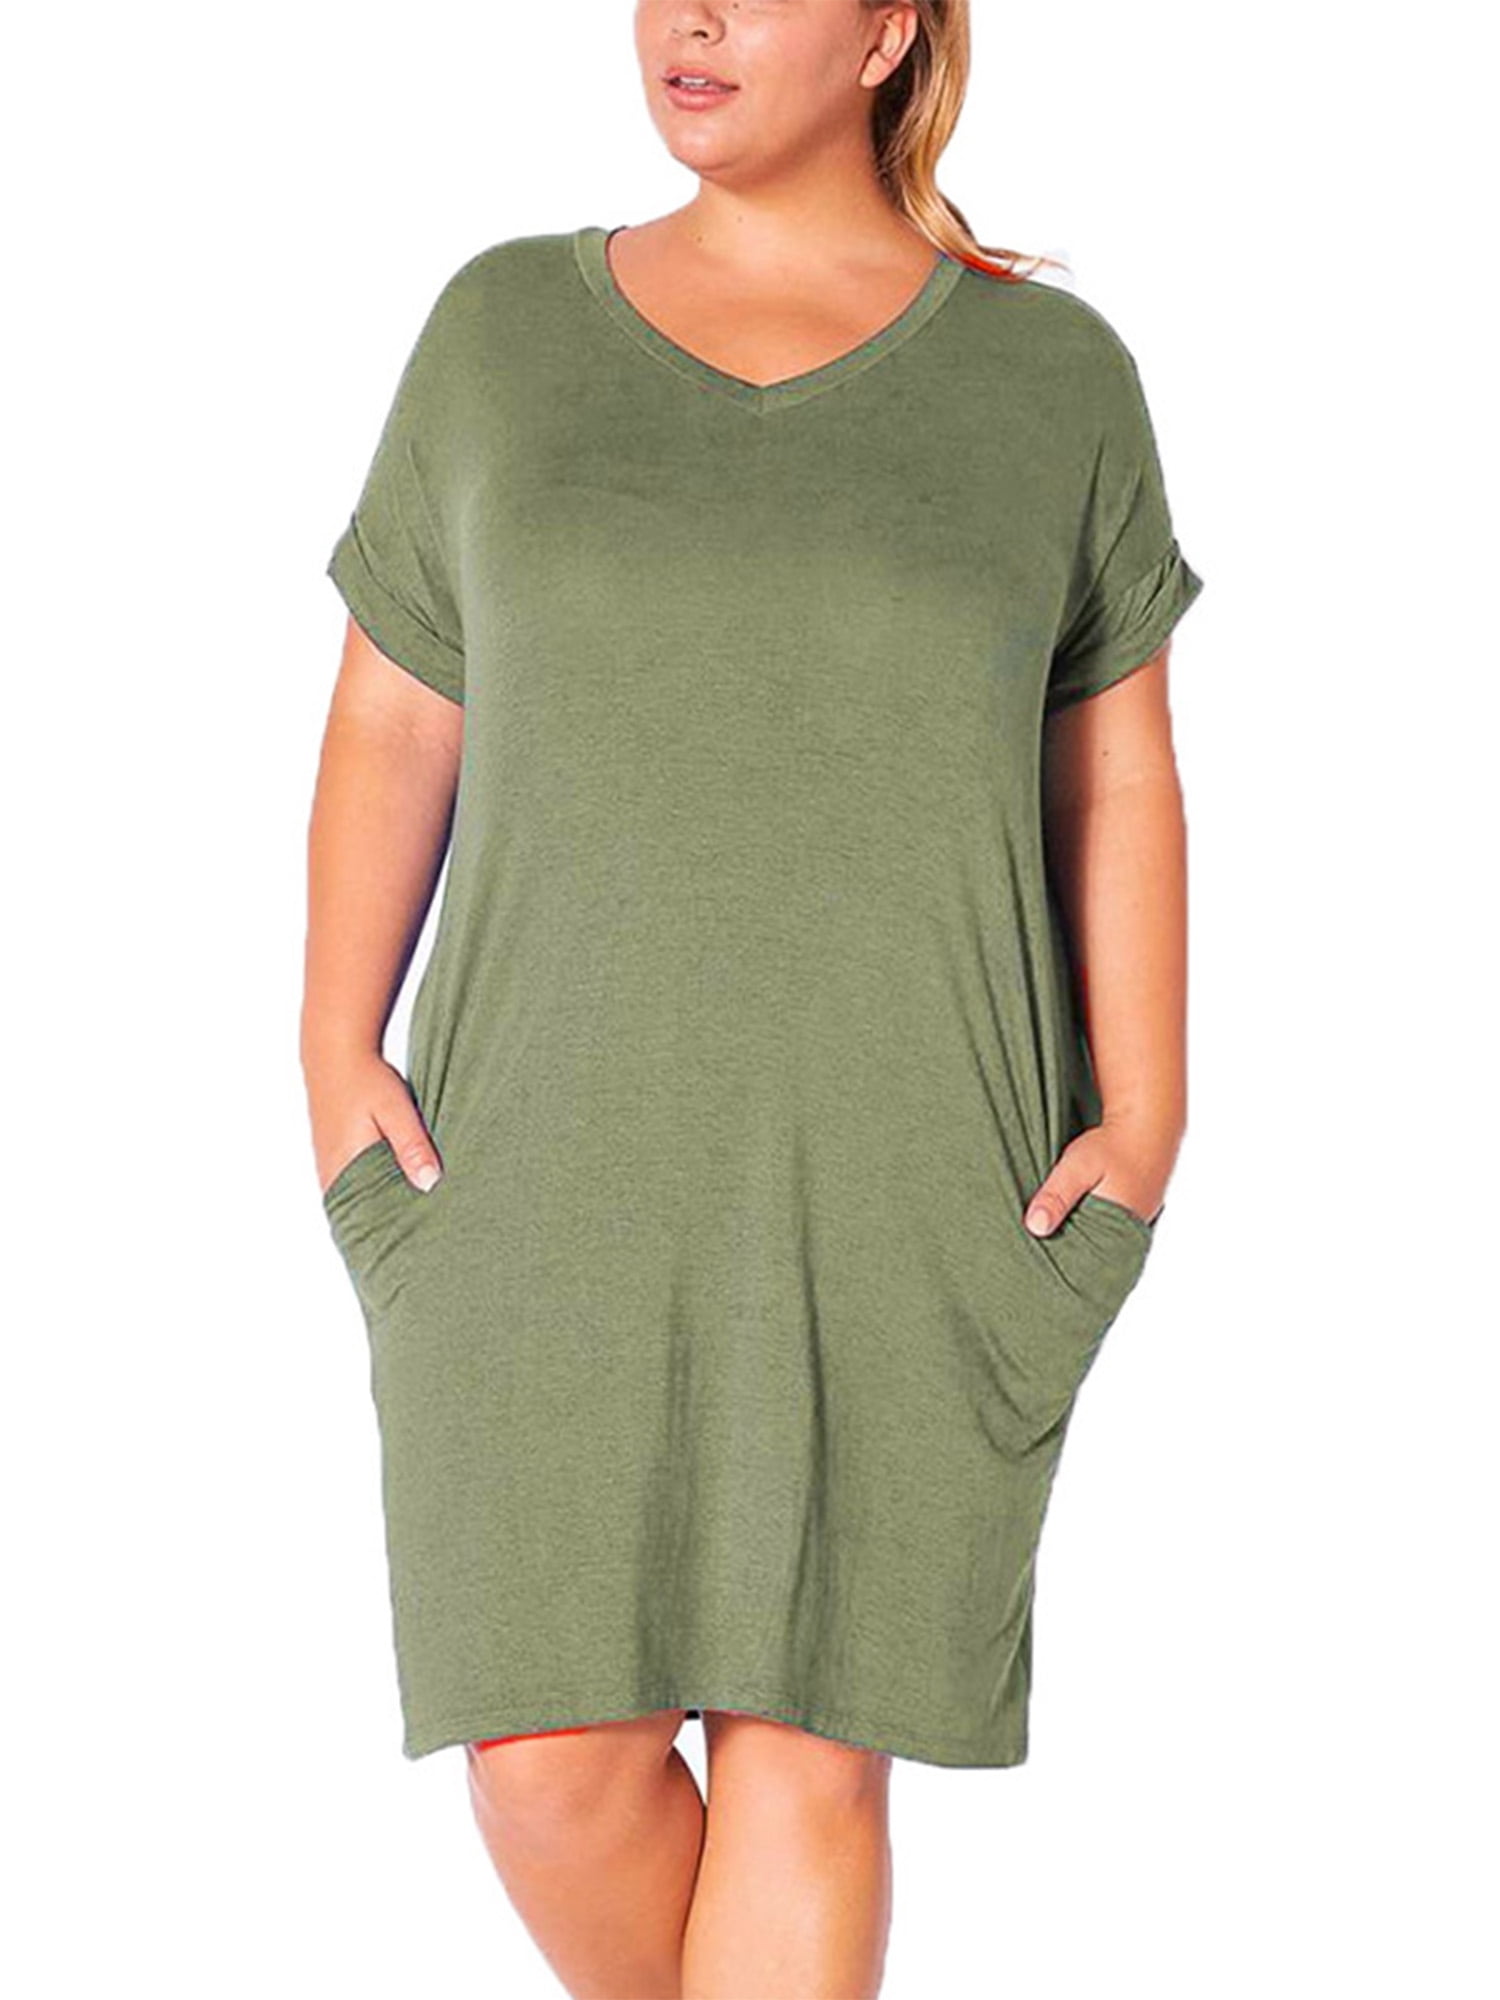 MAWCLOS Womens Plus Size Summer Short Sleeve Casual Dresses Loose Comfy T Shirt Dress Solid Lounge with Pockets